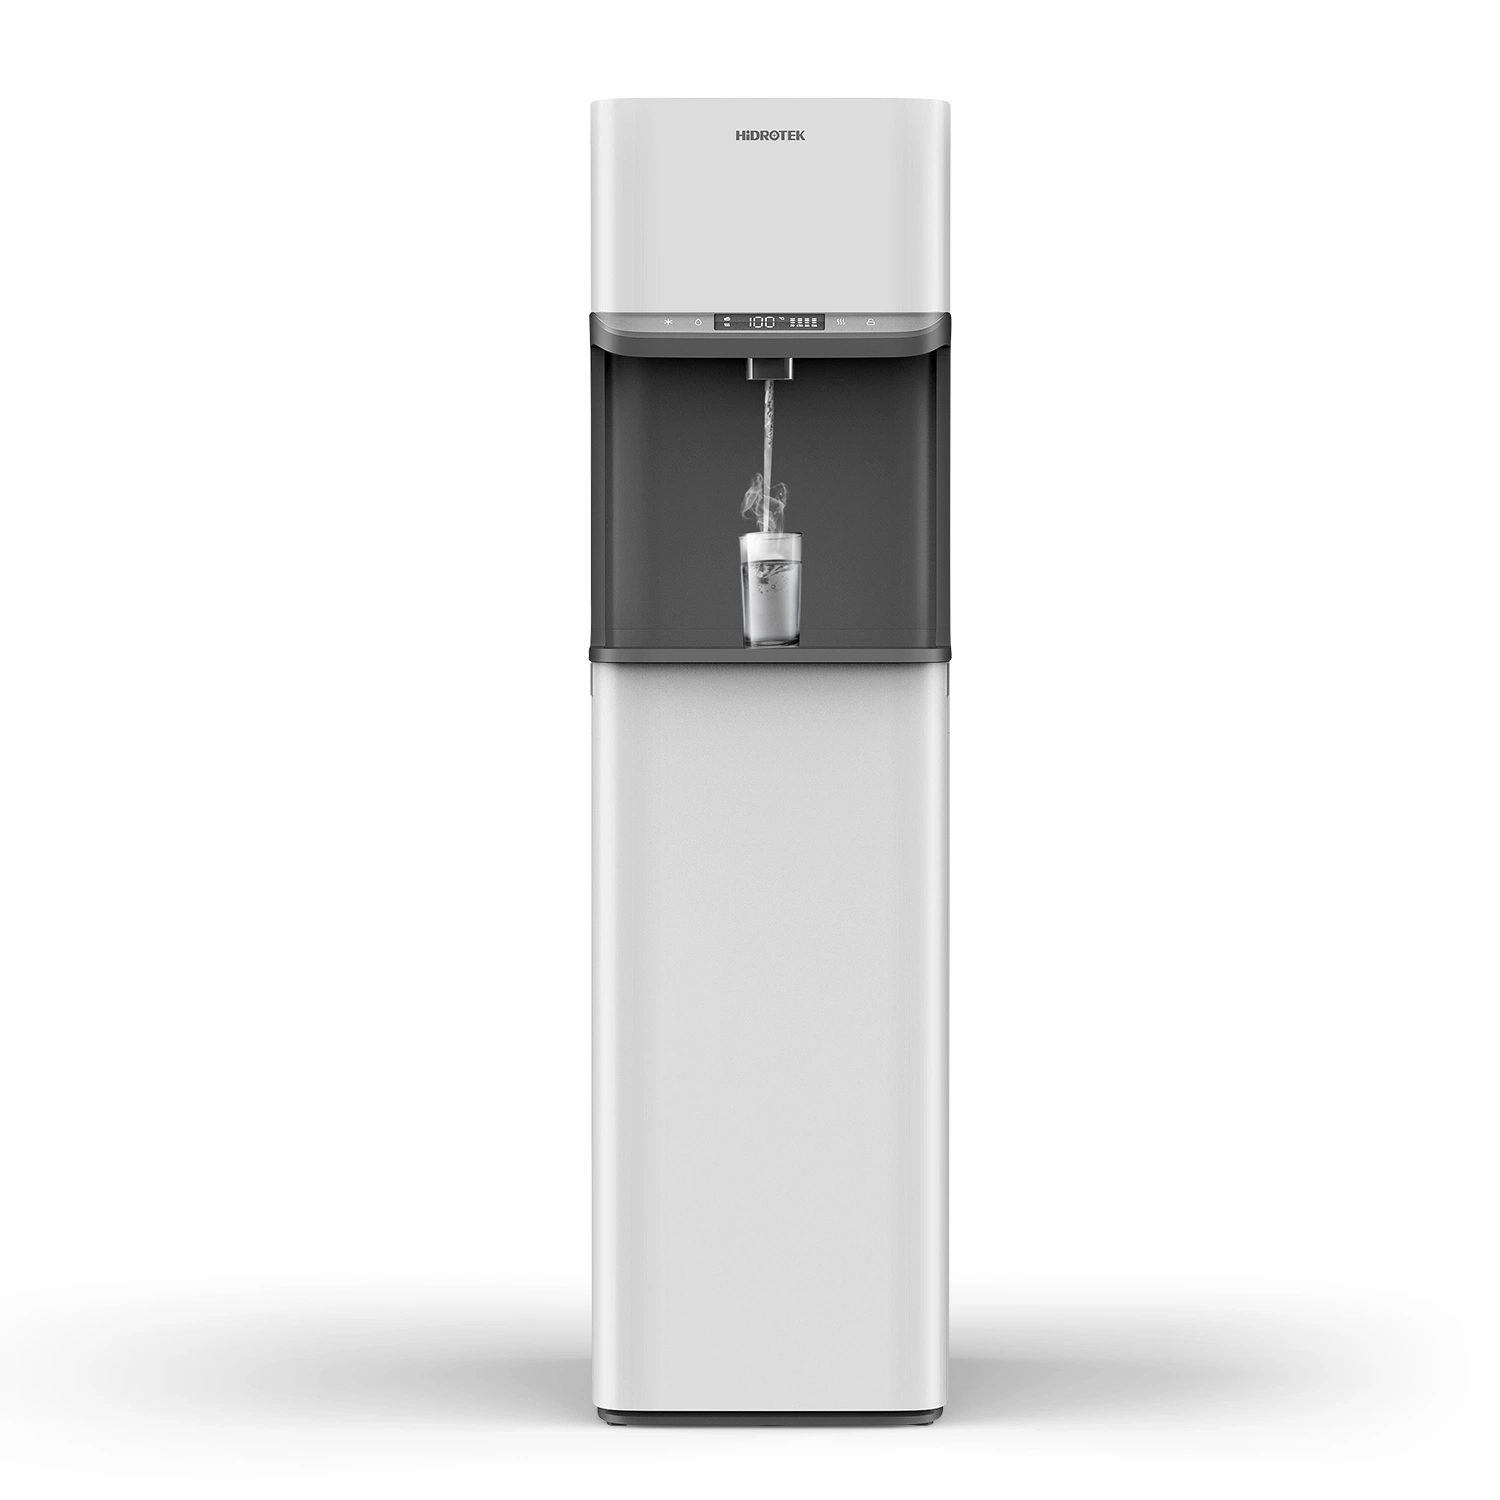 China Big Factory 150gpd Floor Vertical Hot and Cold Smart Water Filter Purifier and Dispenser with Minimalist Style